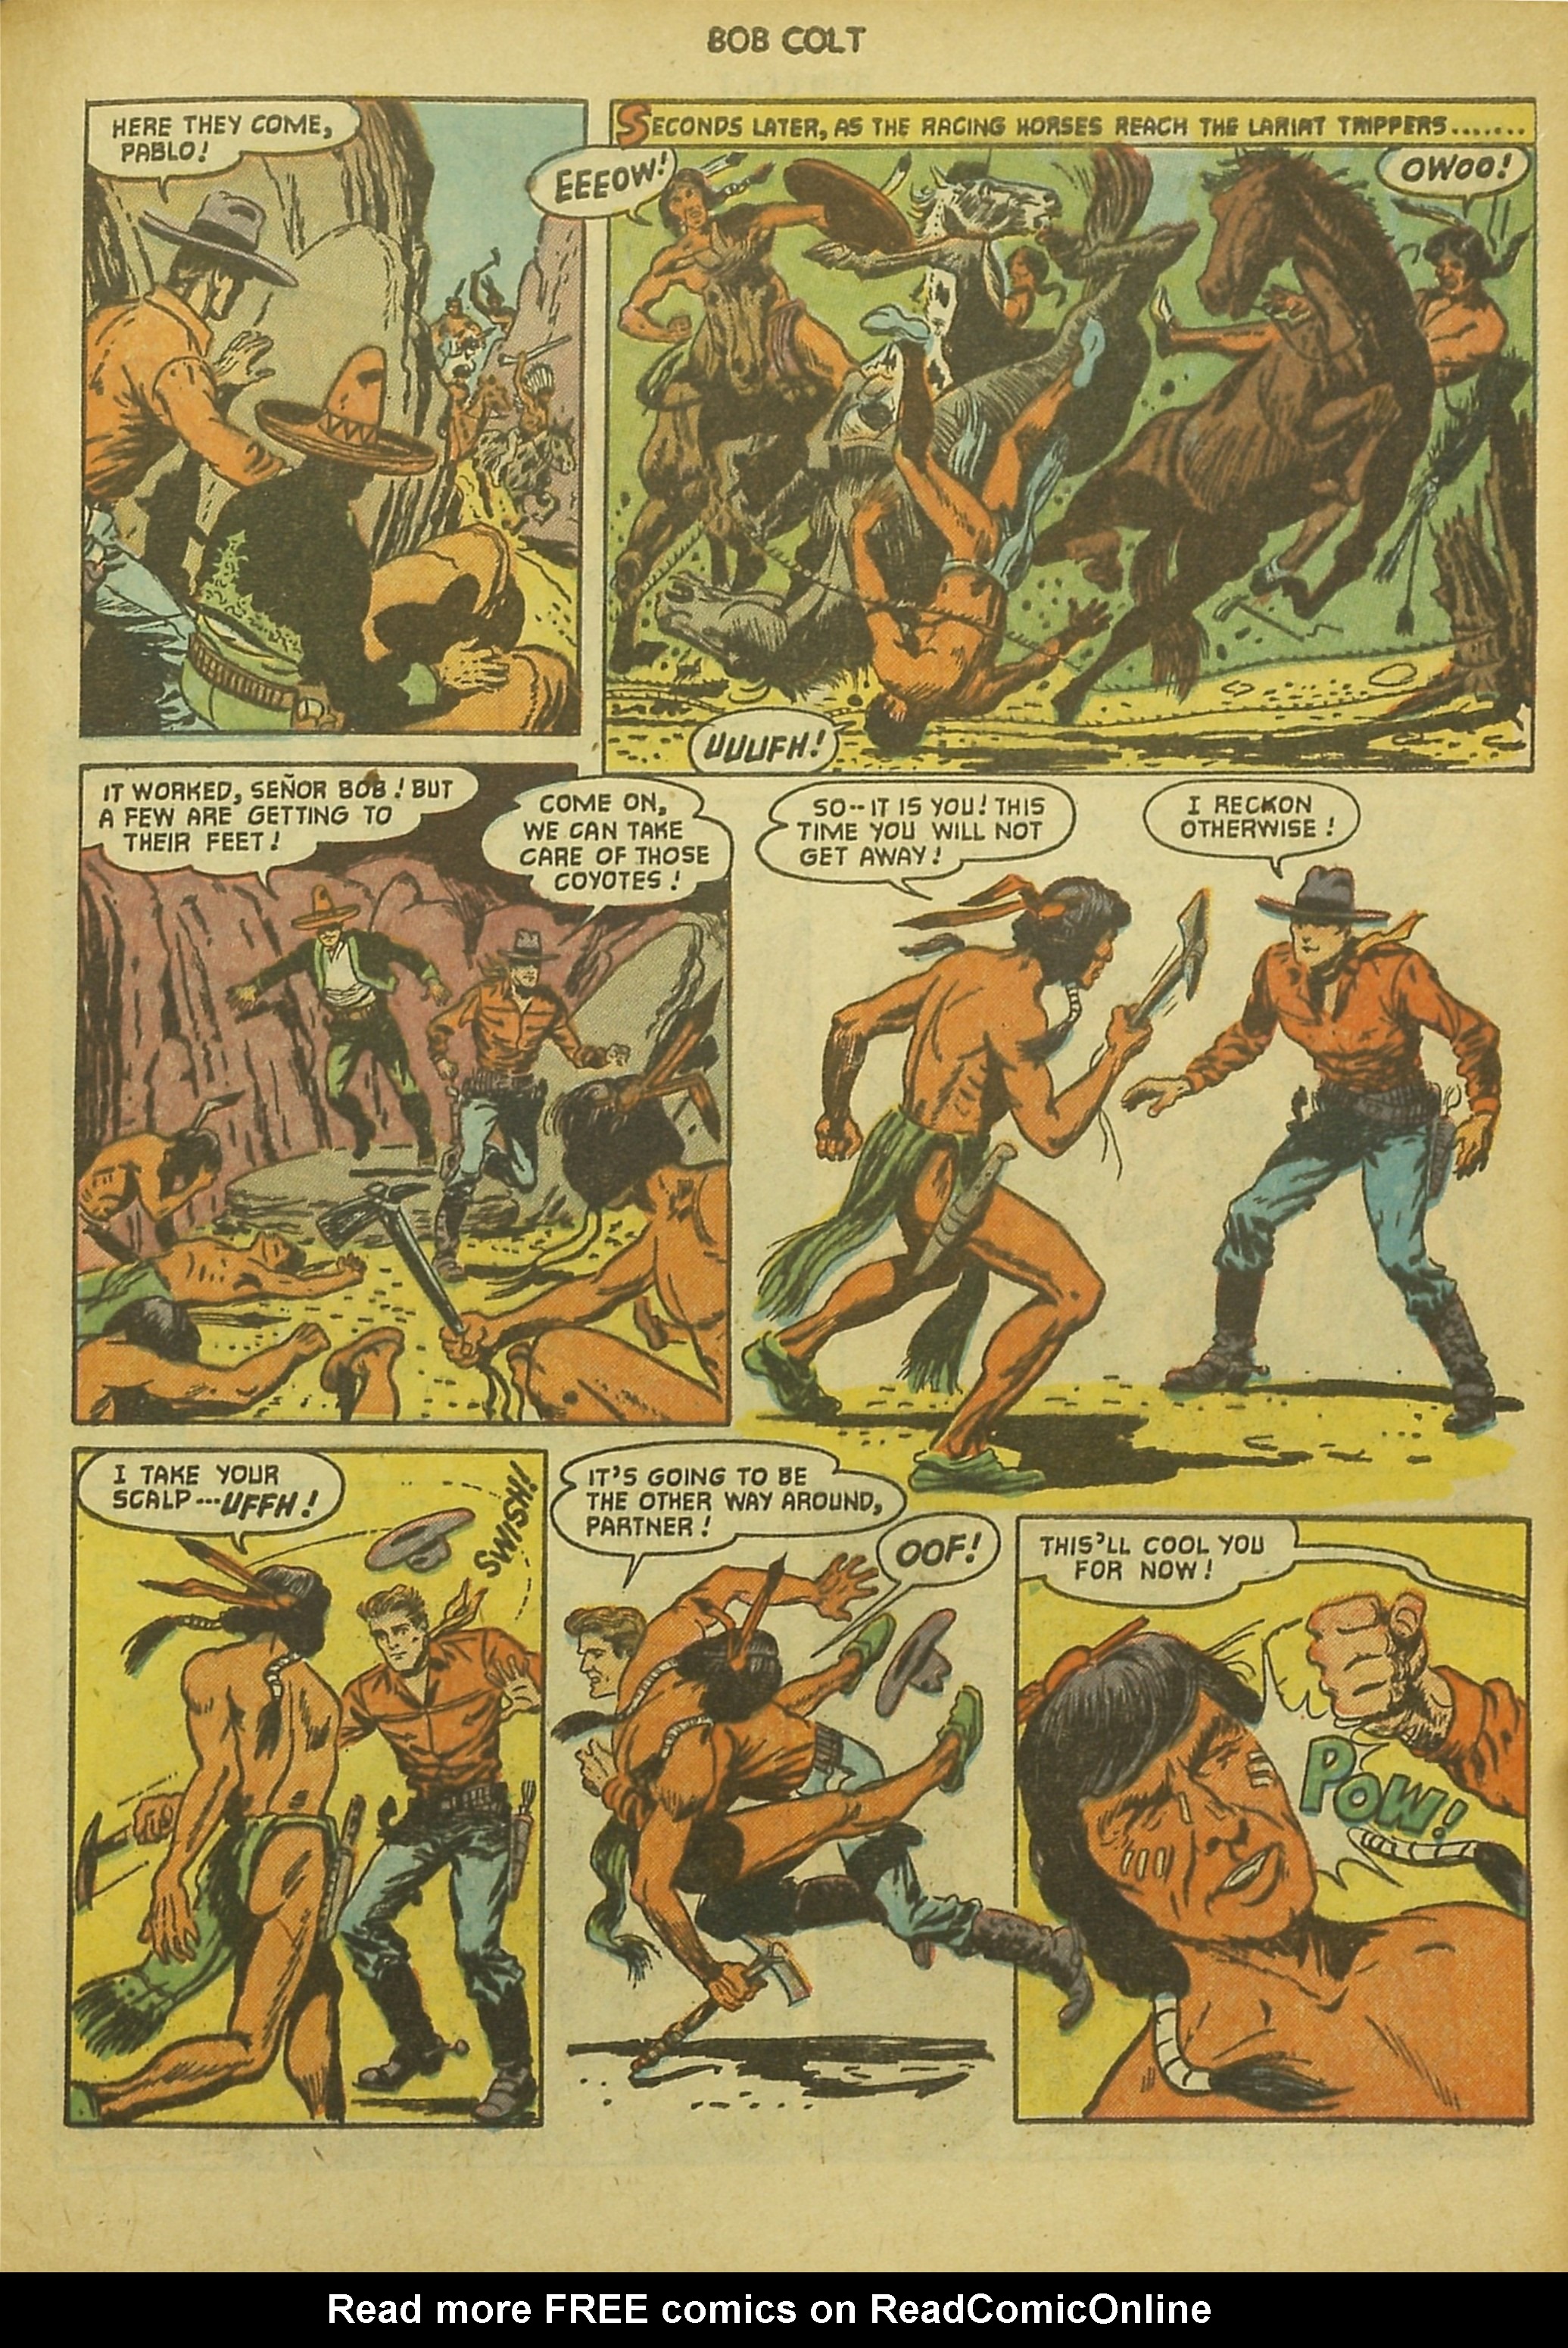 Read online Bob Colt Western comic -  Issue #9 - 33